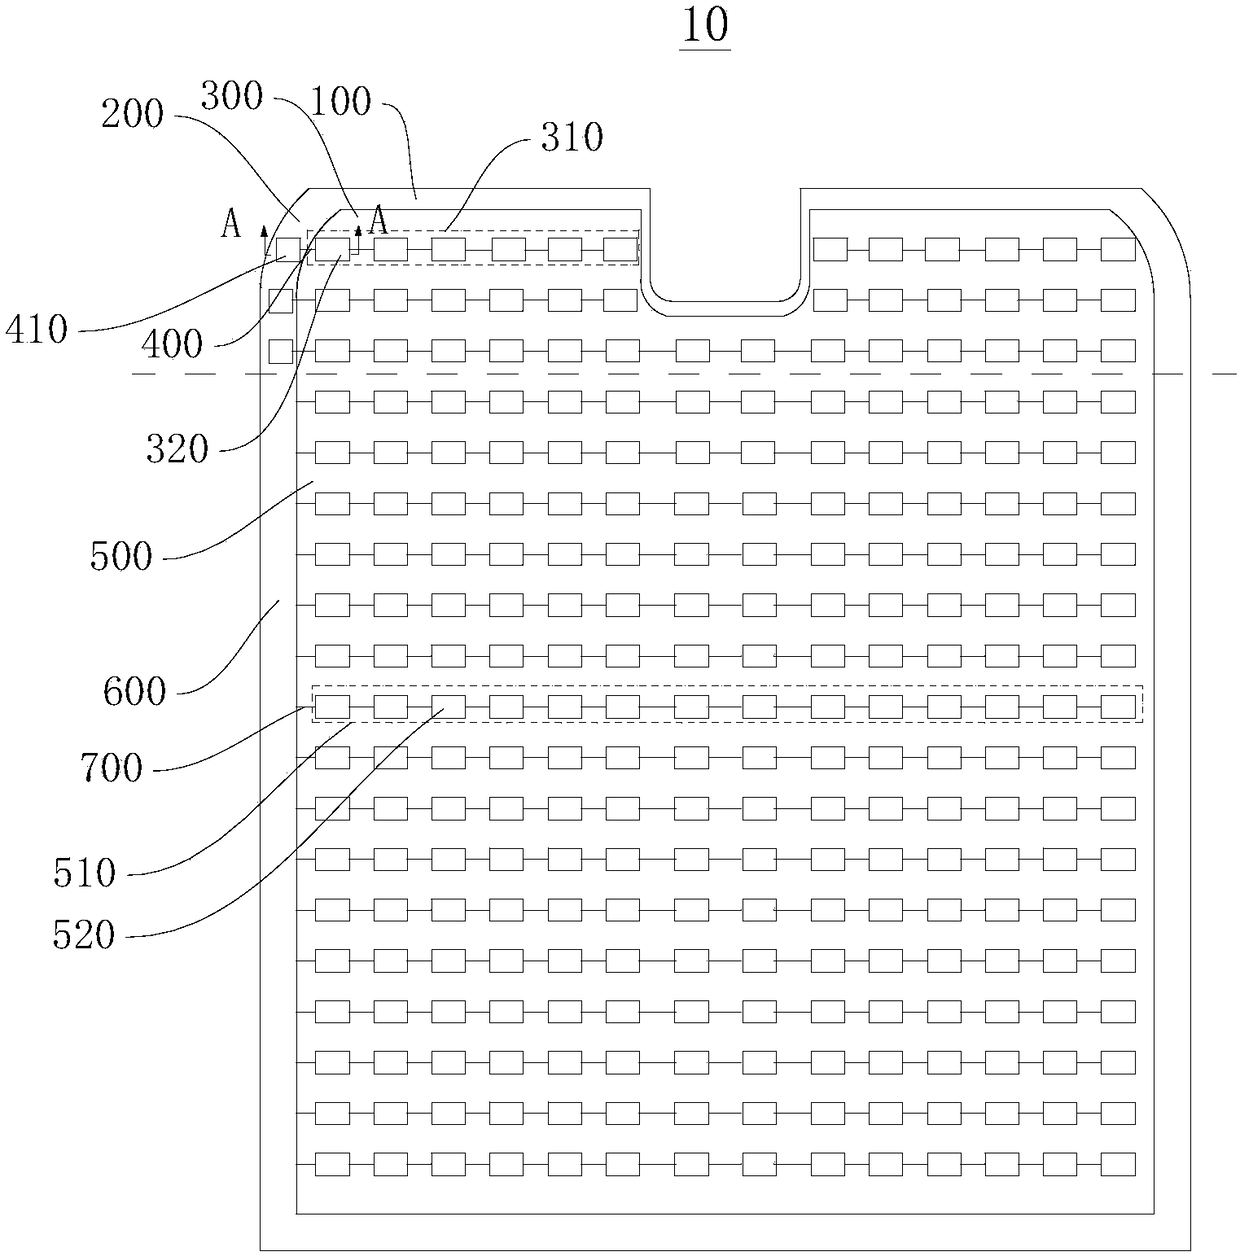 Drive substrate and display panel